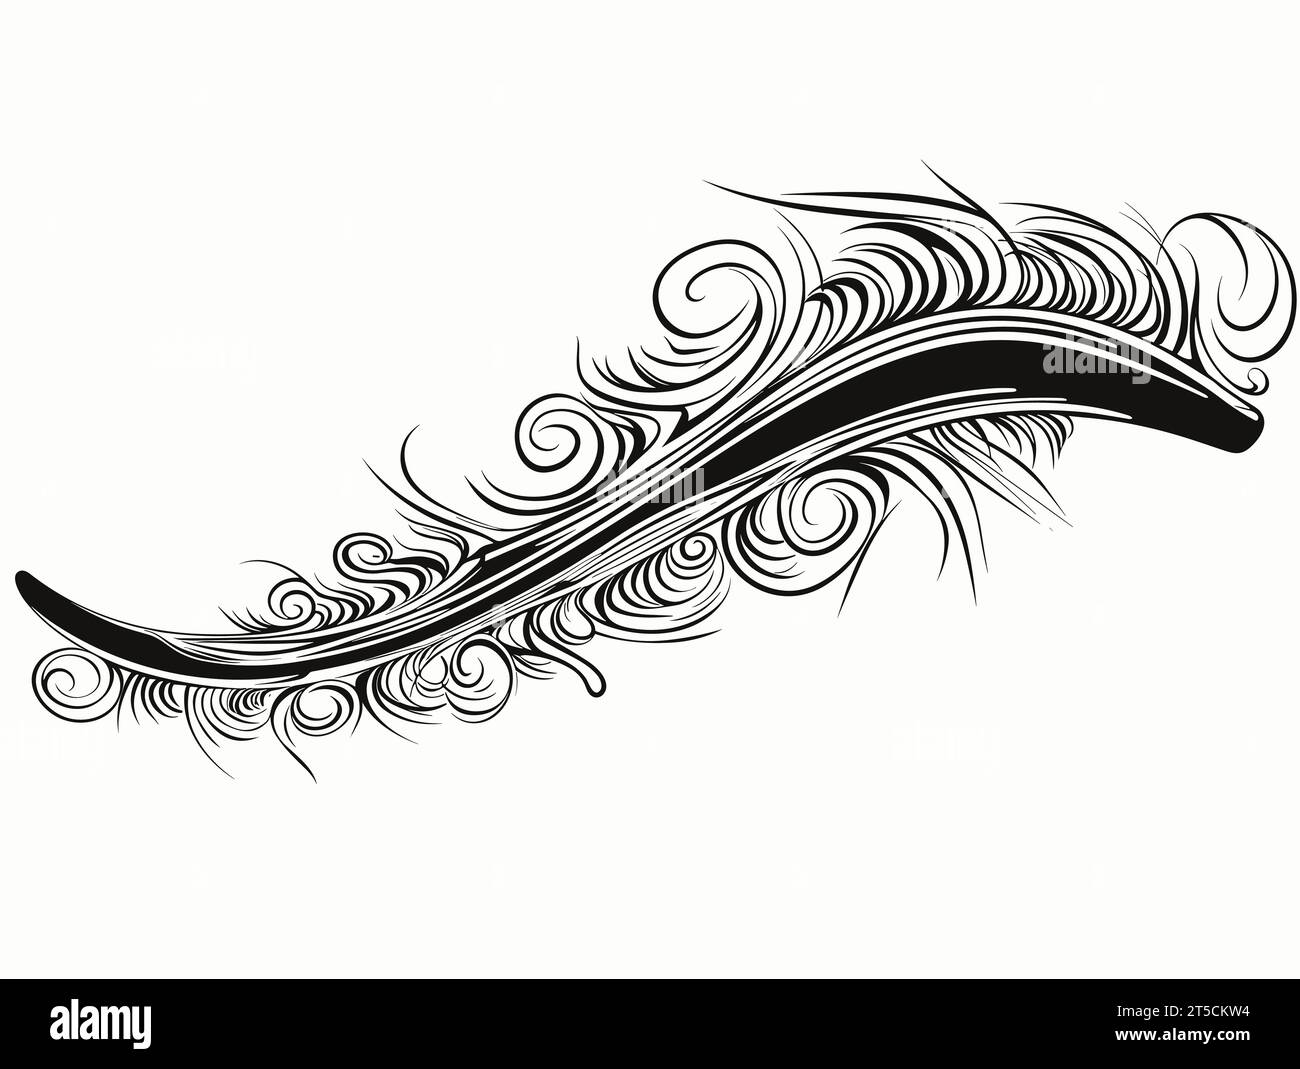 Drawing of vector illustration of a toothbrush illustration separated, sweeping overdrawn lines. Stock Vector